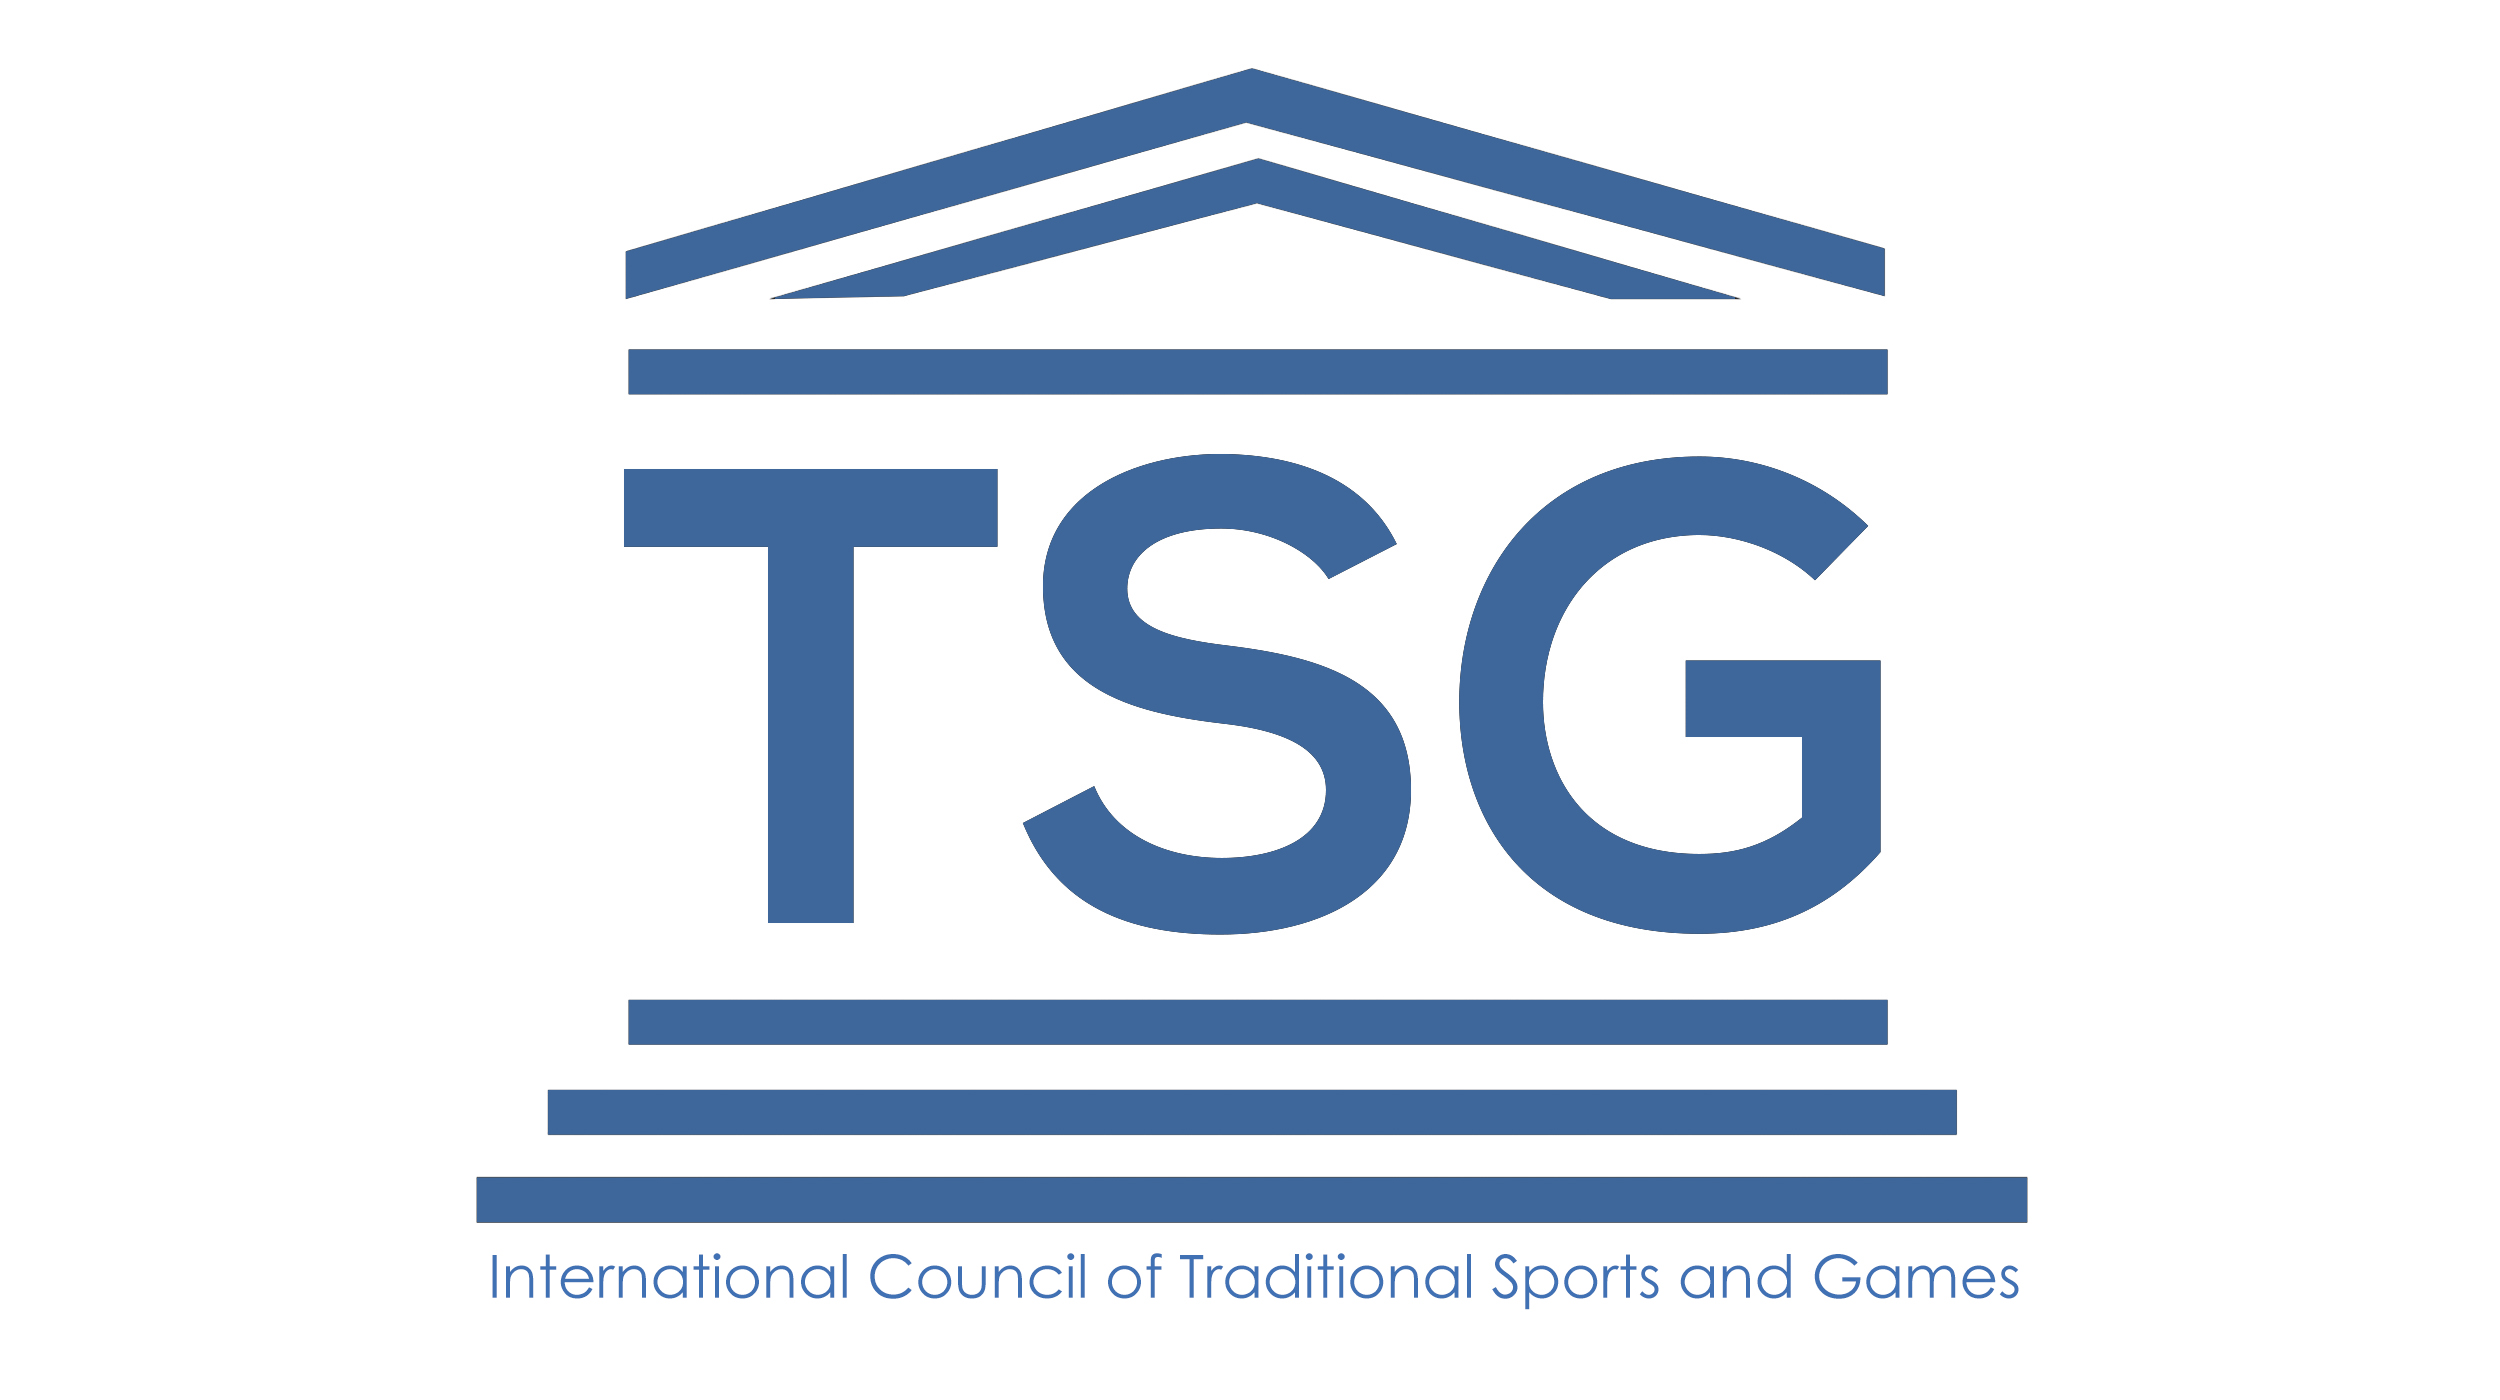 Traditional and indigenous sports recognised by ICTSG